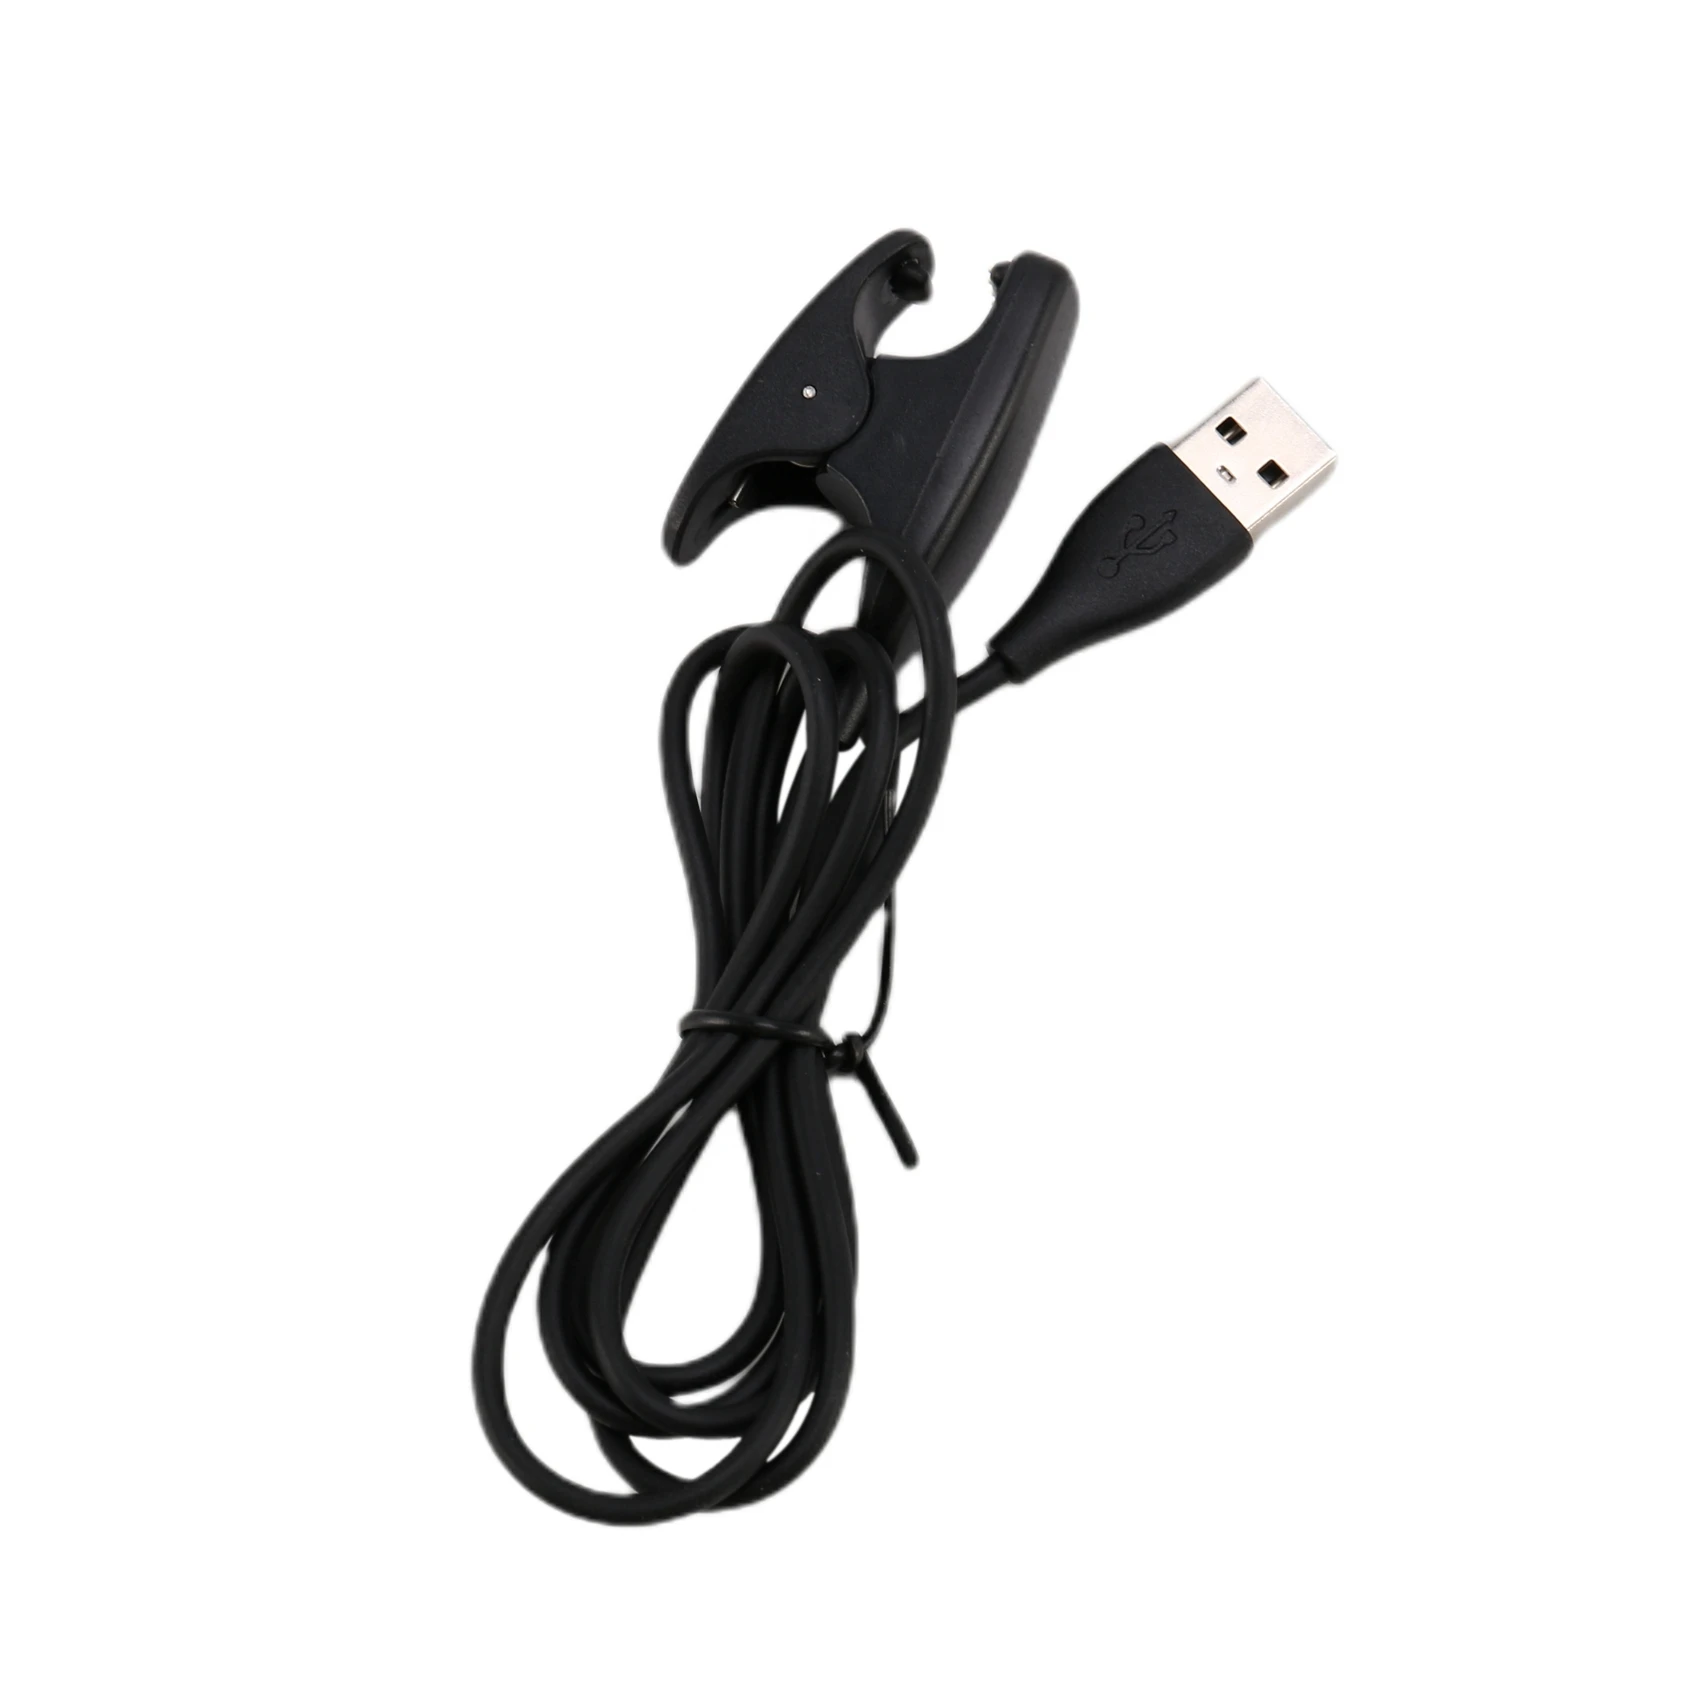 

3.3Ft USB Charging Cable Cradle Dock Charger for Suunto 3 Fitness,Suunto 5,Ambit 1 2 3,Traverse,Kailash,Spartan Trainer